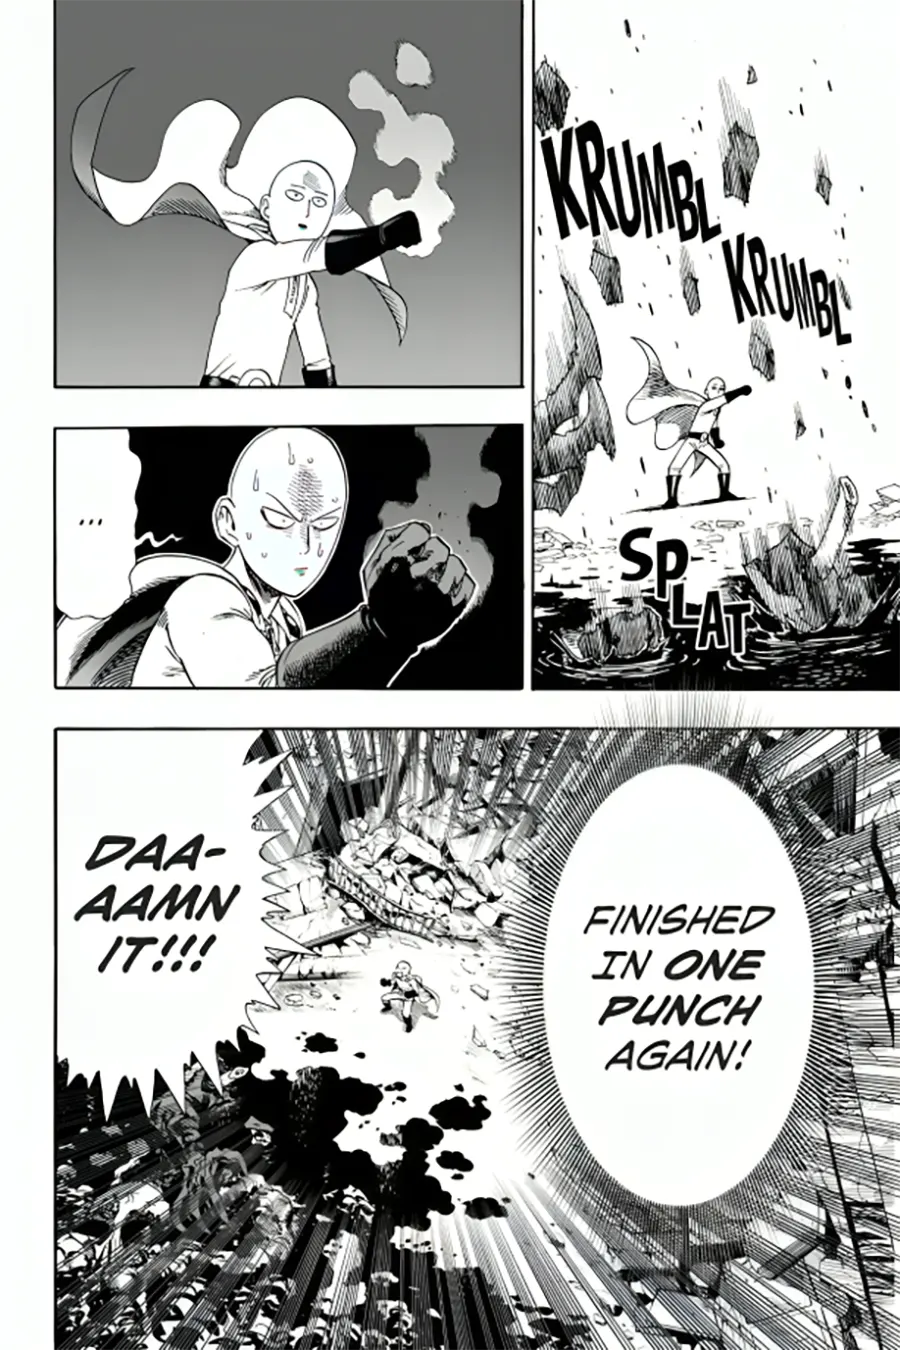 Saitama can’t believe he ended another fight with just a single punch